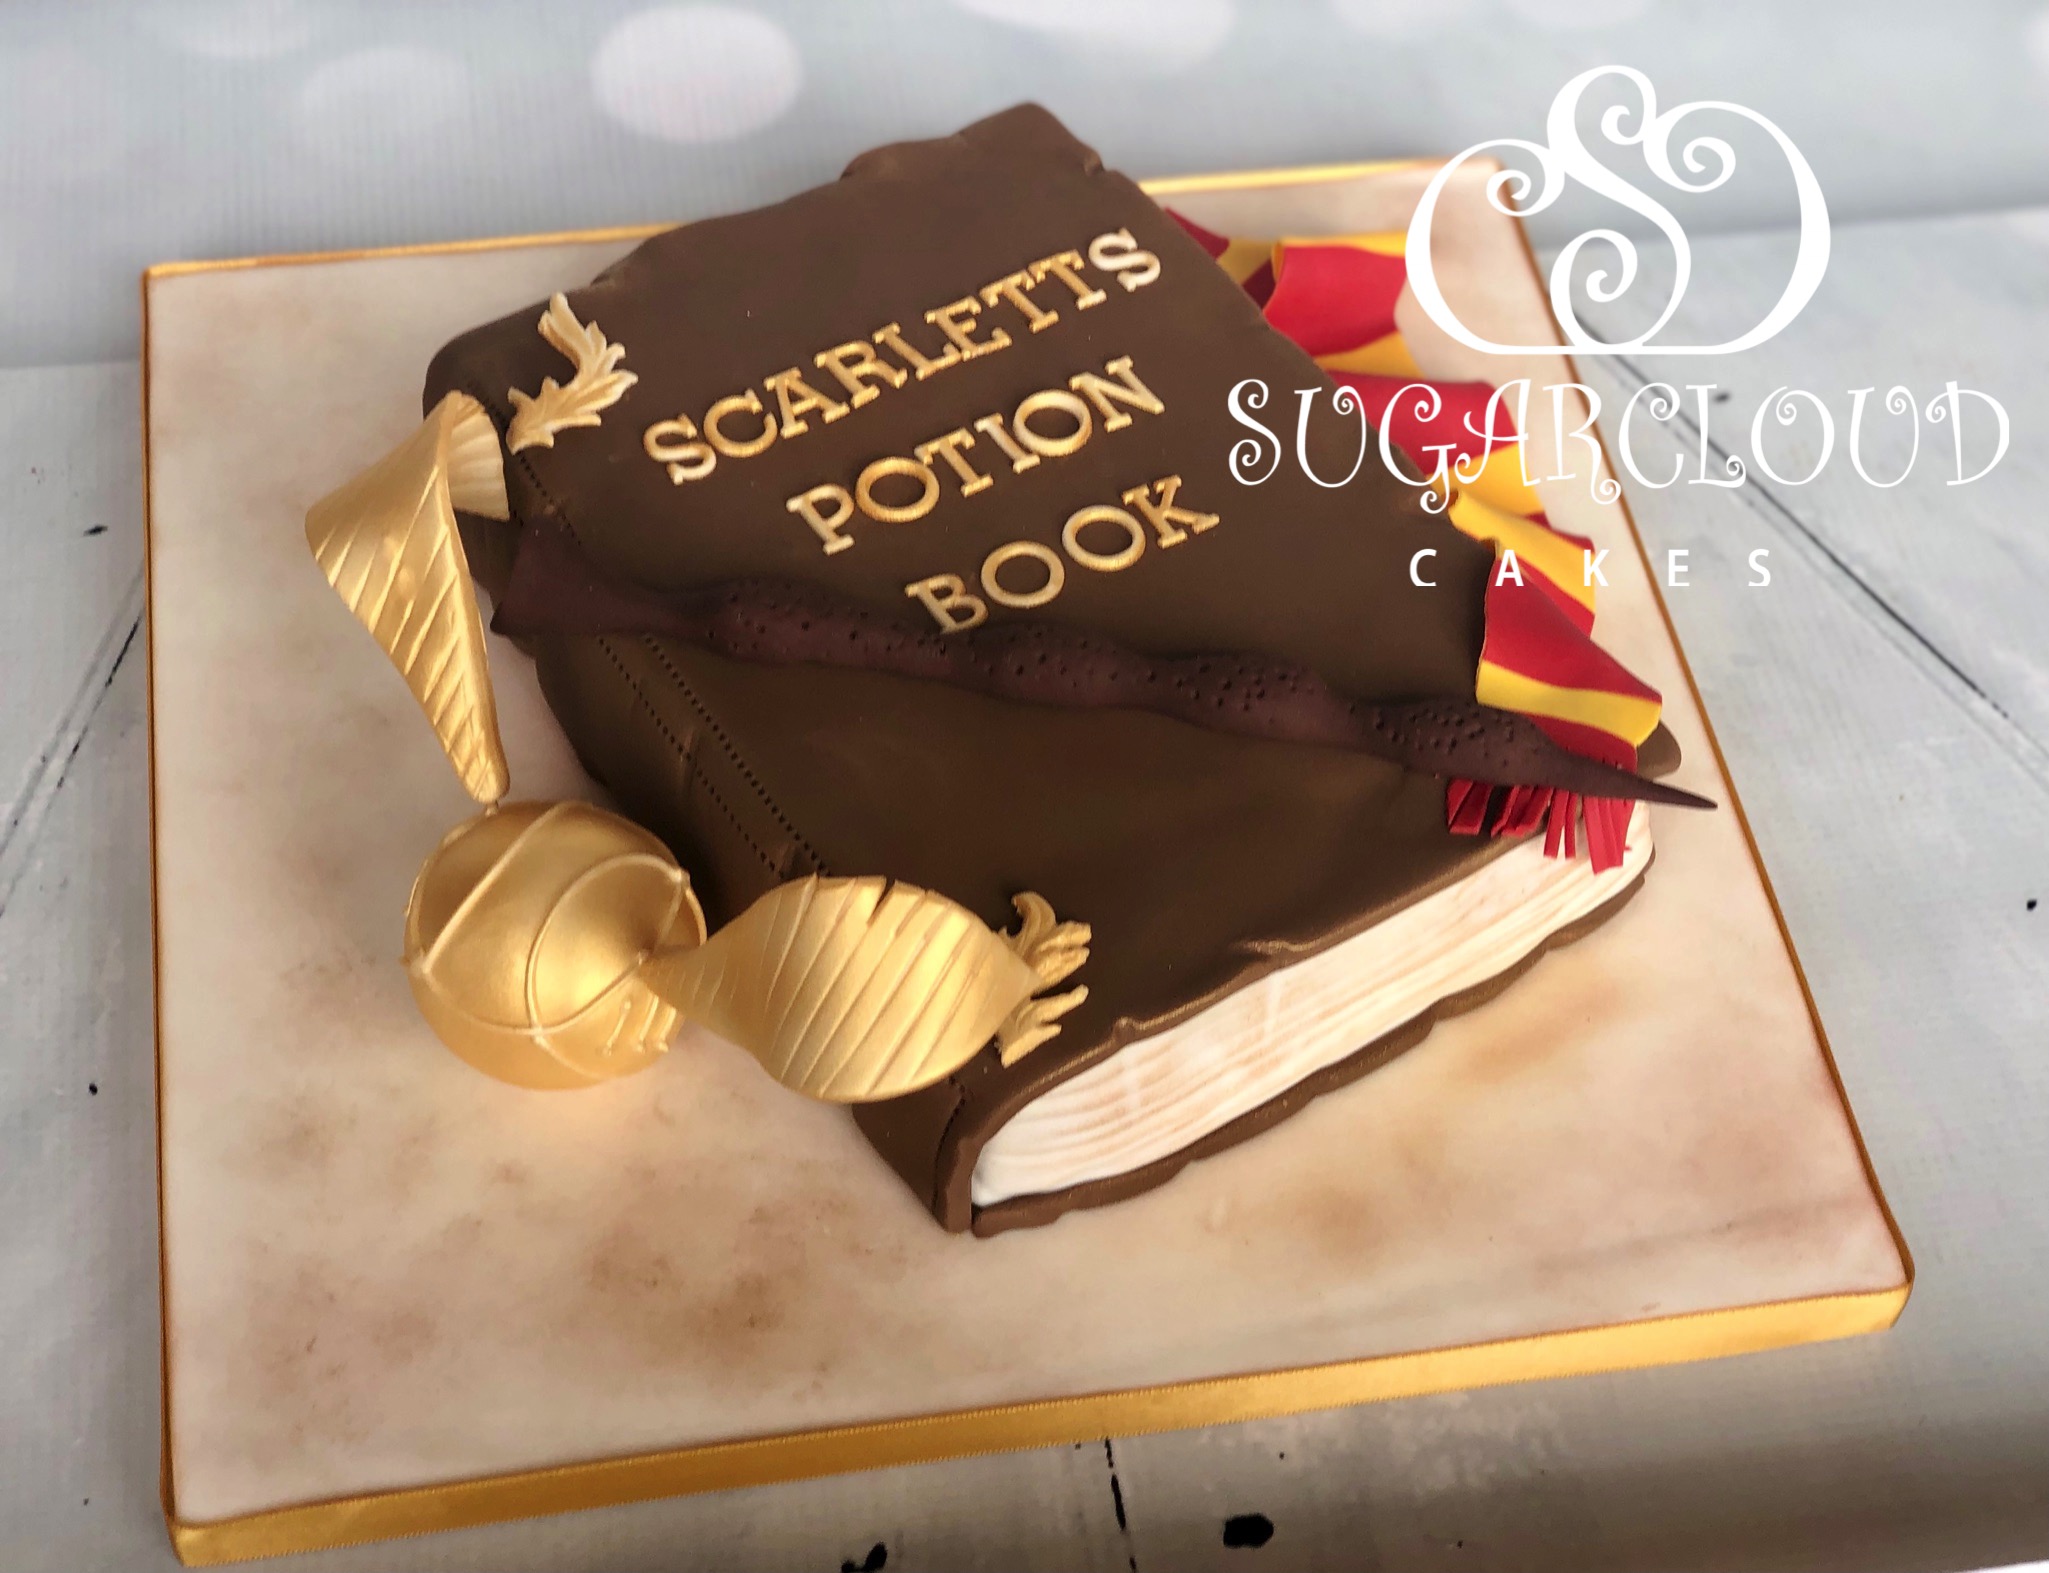 A dairy free and hens egg free Harry Potter themed birthday cake